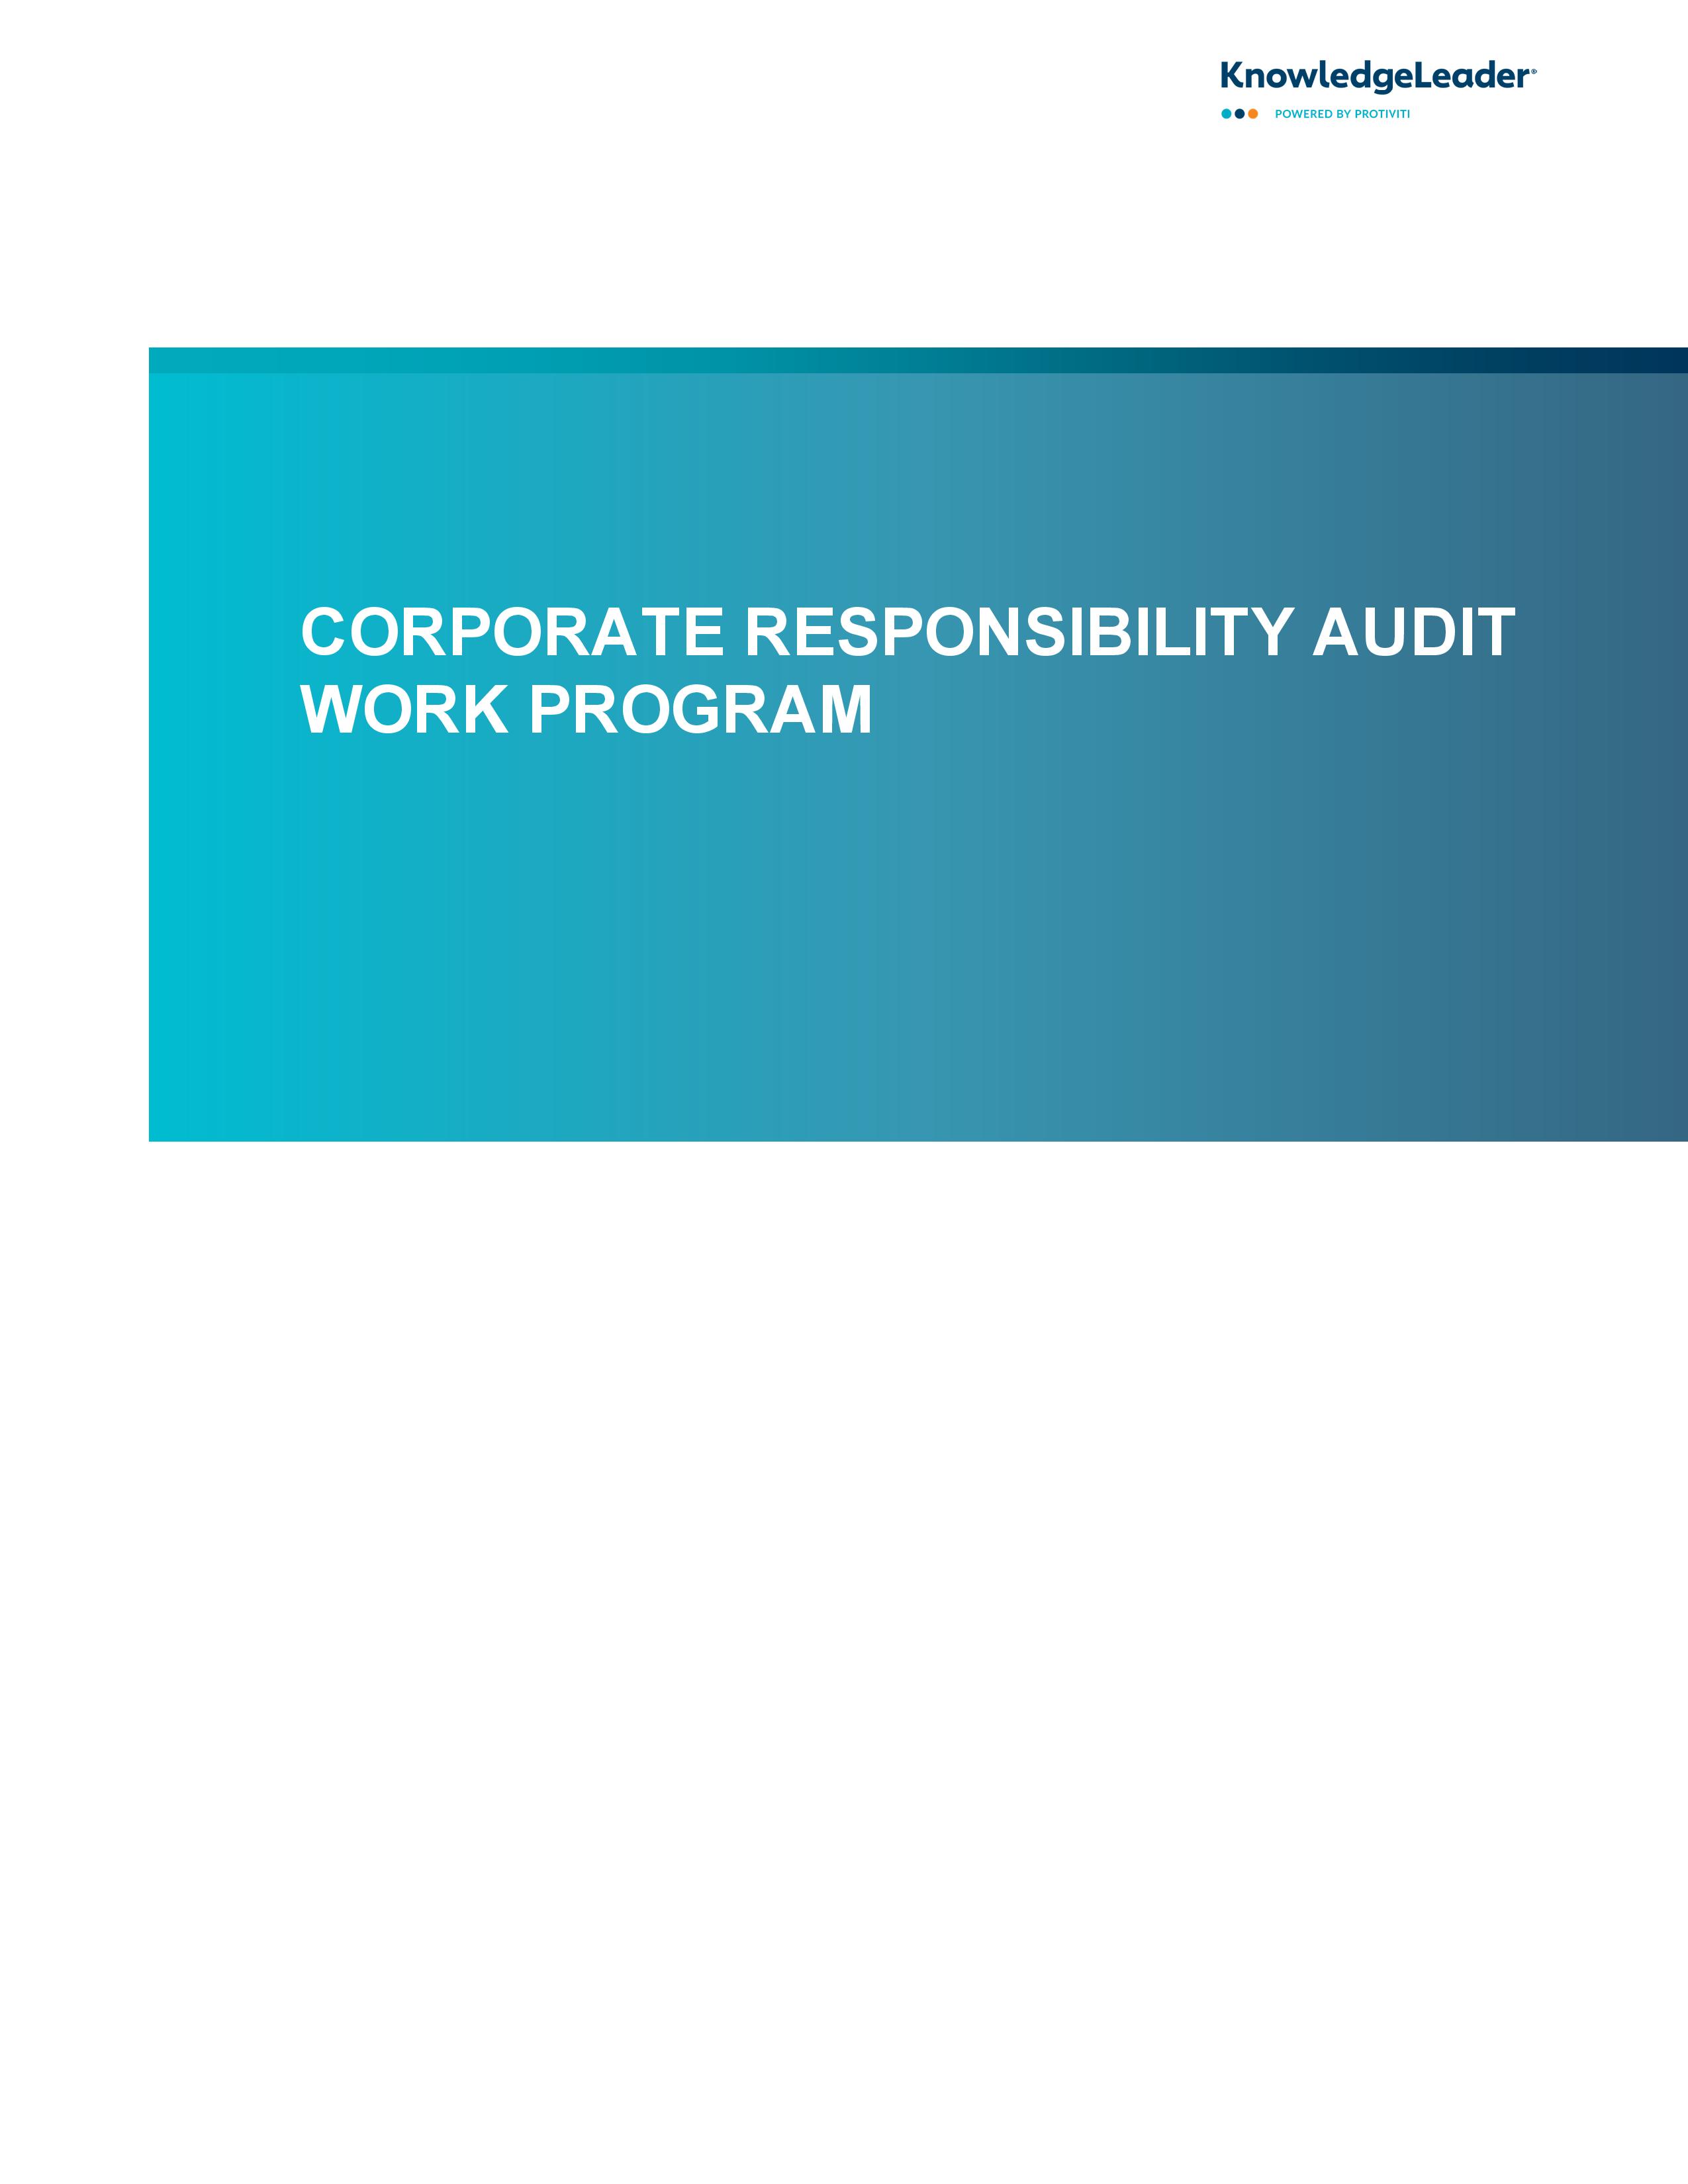 screenshot of the first page of Corporate Responsibility Audit Work Program